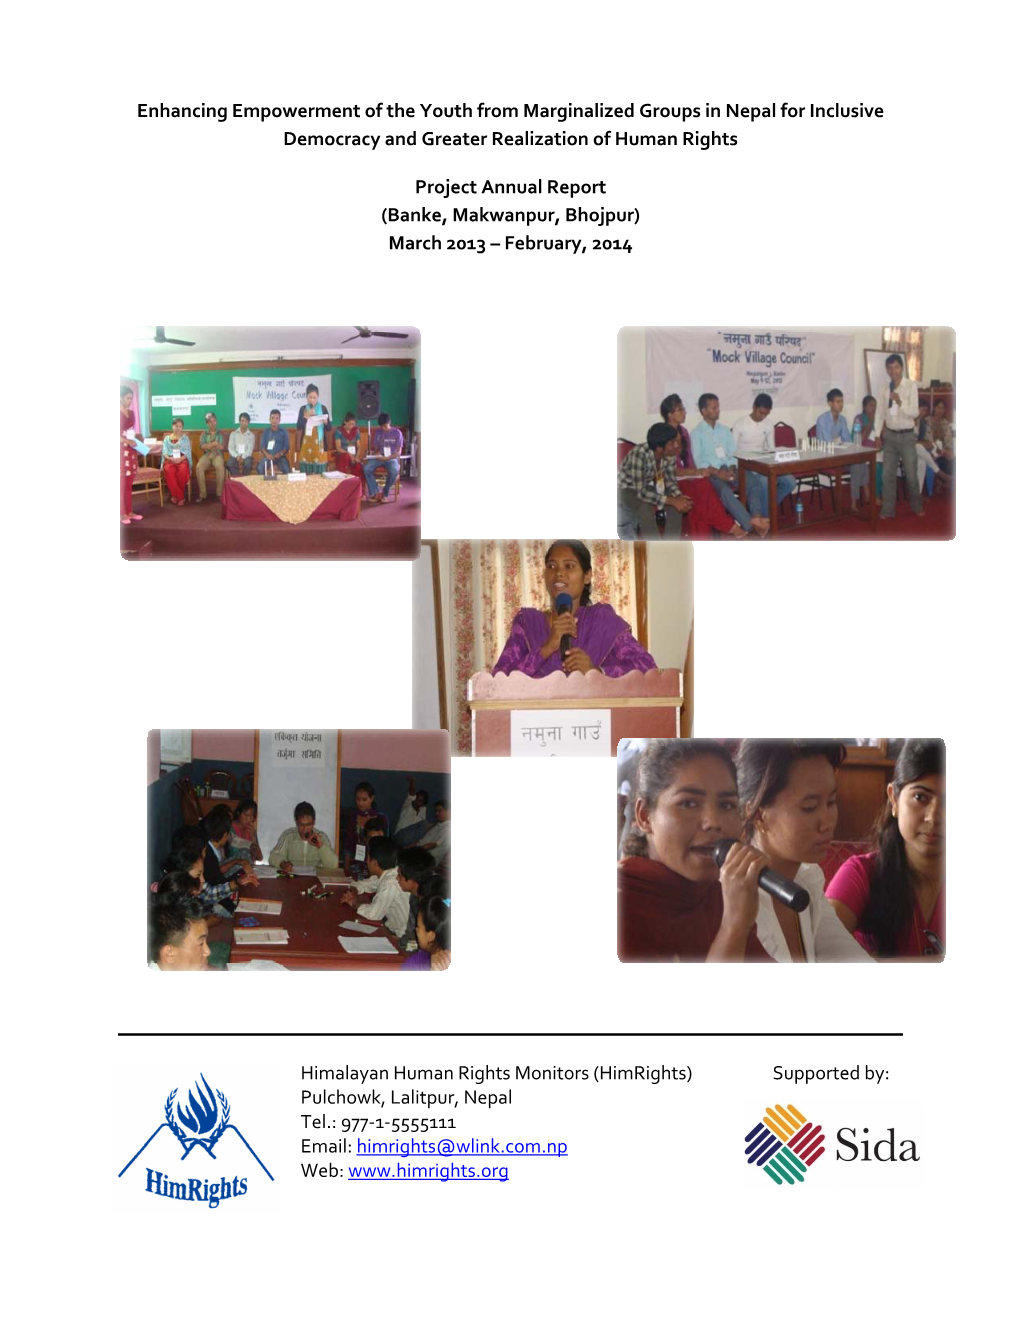 Enhancing Empowerment of the Youth from Marginalized Groups in Nepal for Inclusive Democracy and Greater Realization of Human Rights